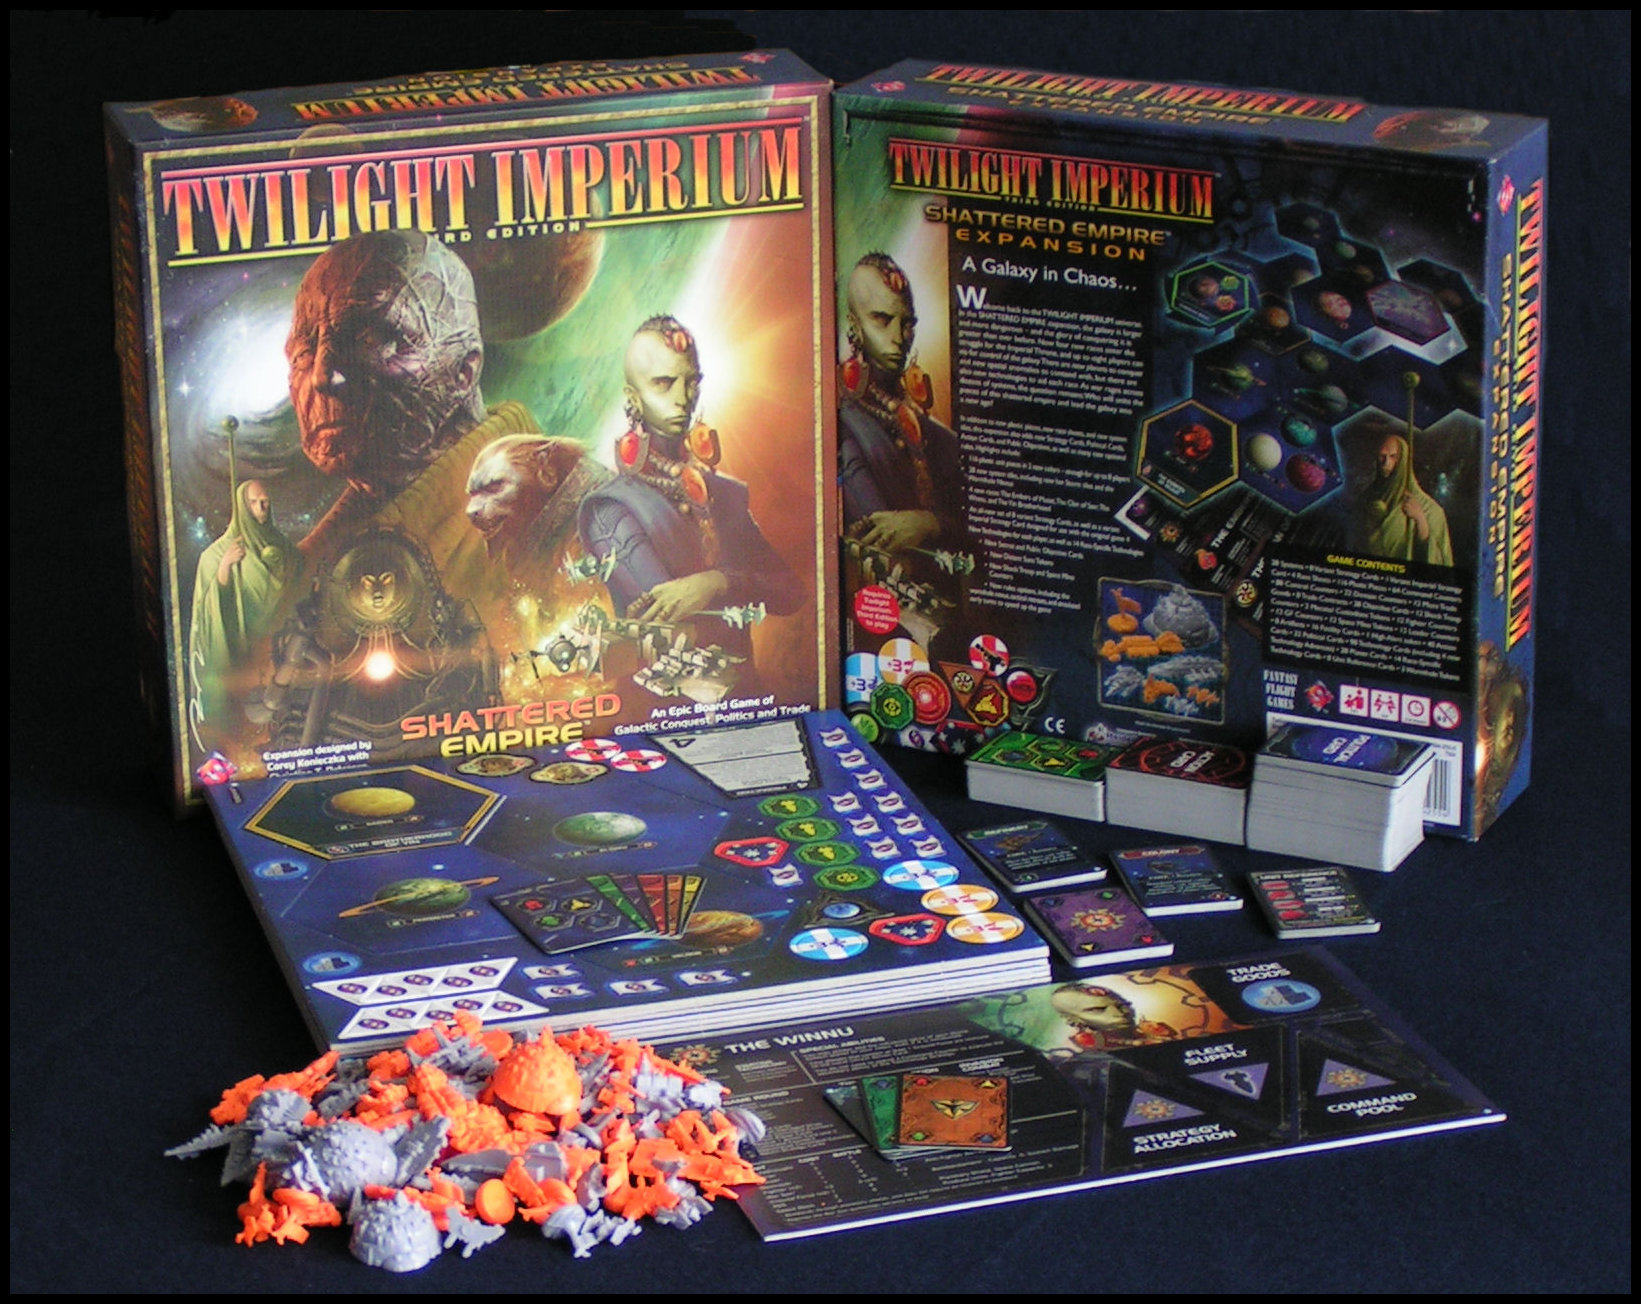 Twilight Imperium 3 Shattered Empire - The Box Contents